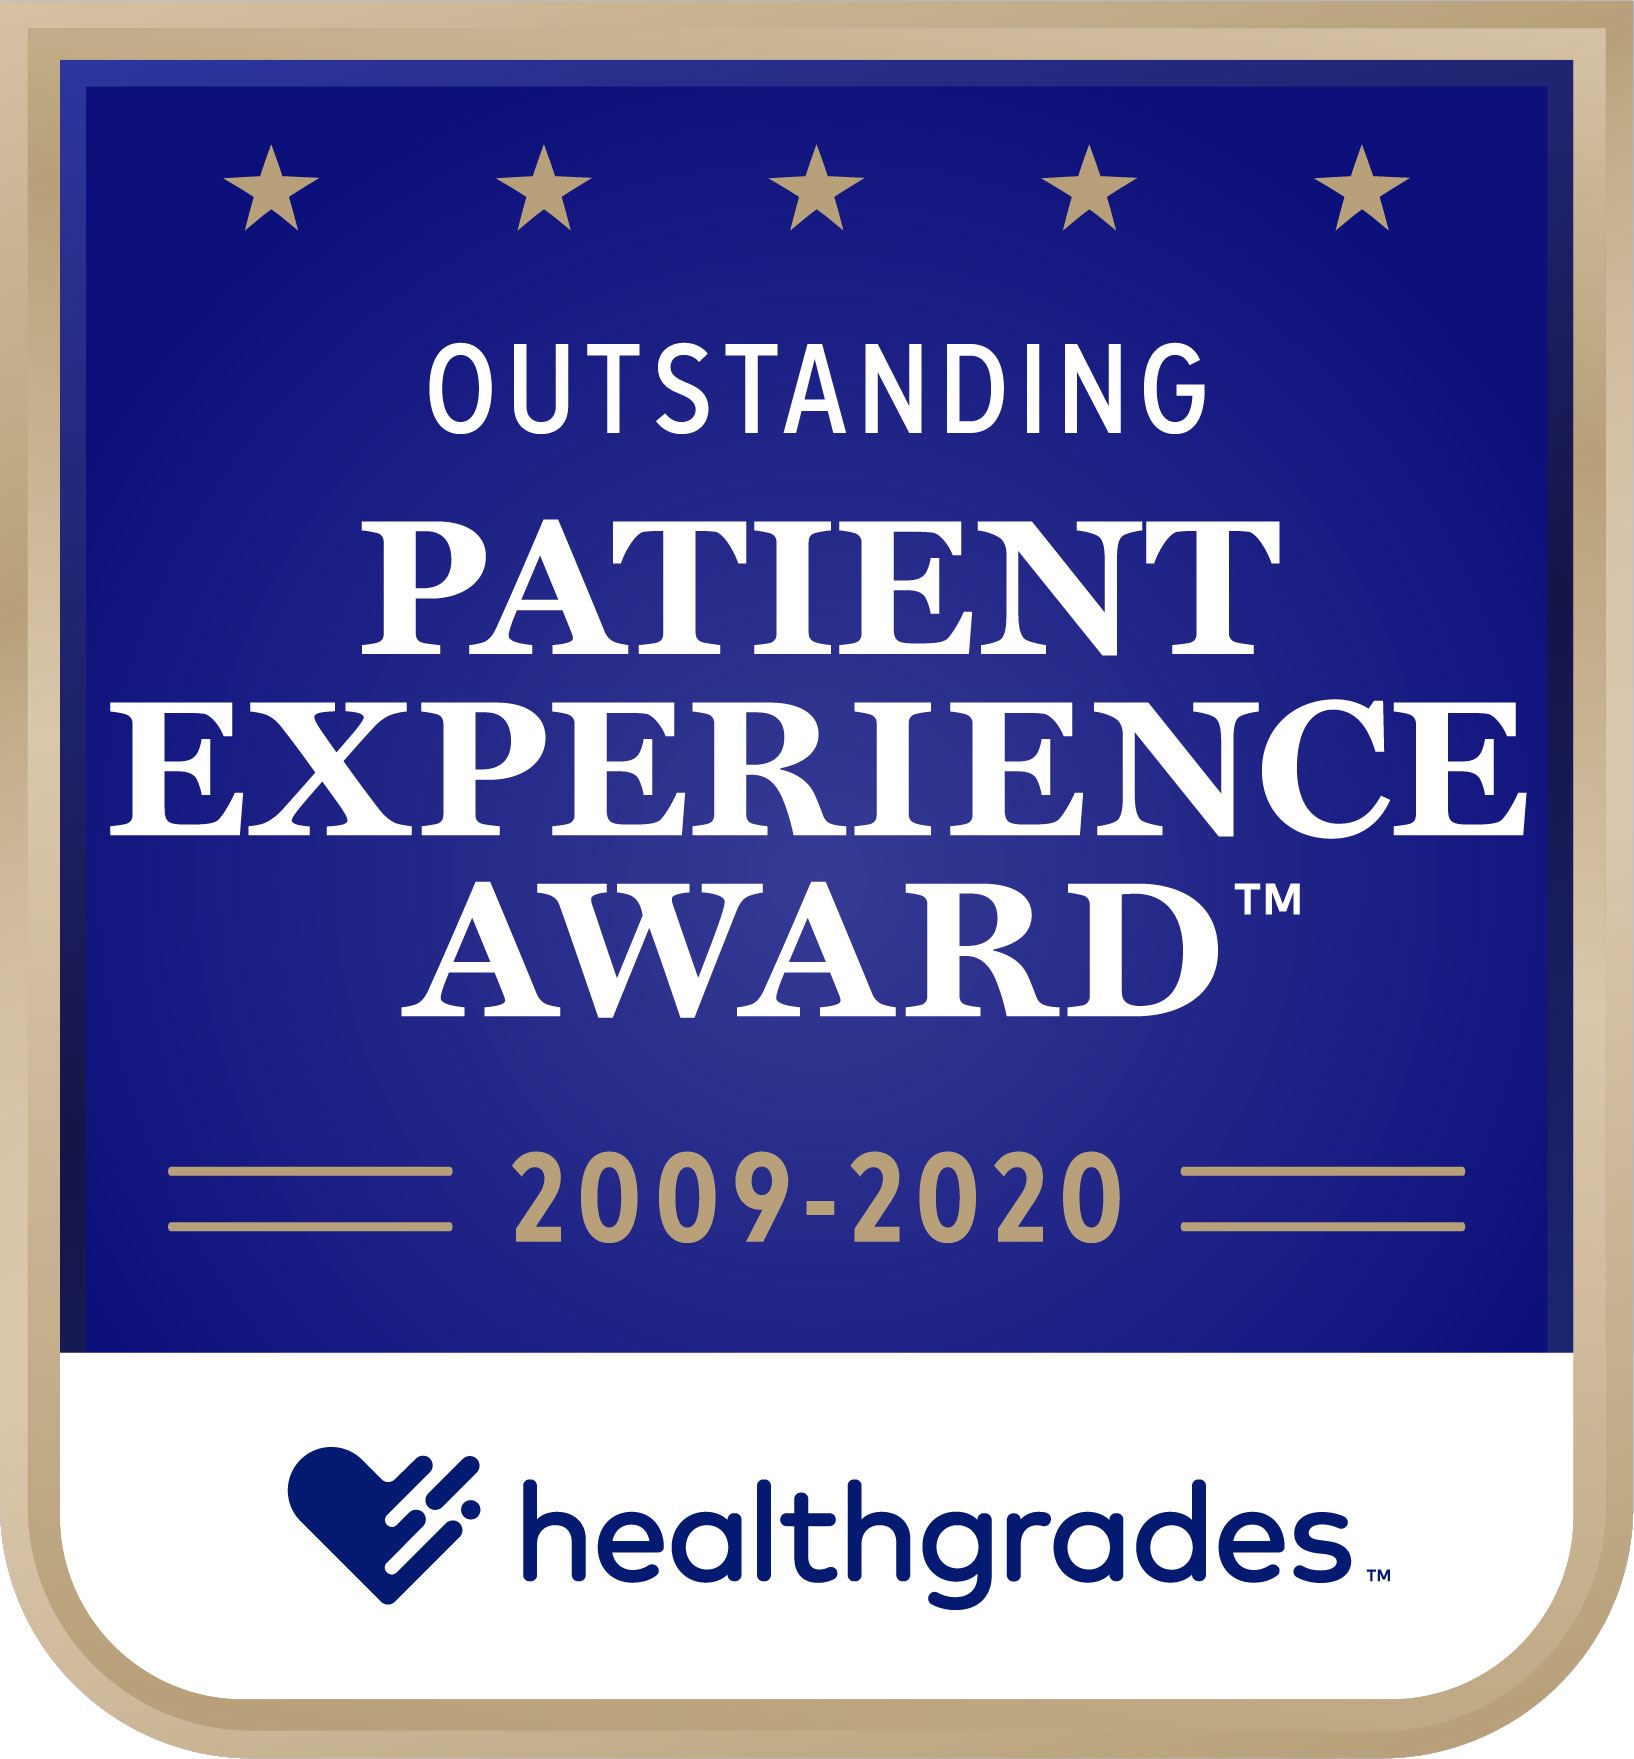 HG Outstanding Patient Experience Award Image 2009-2020